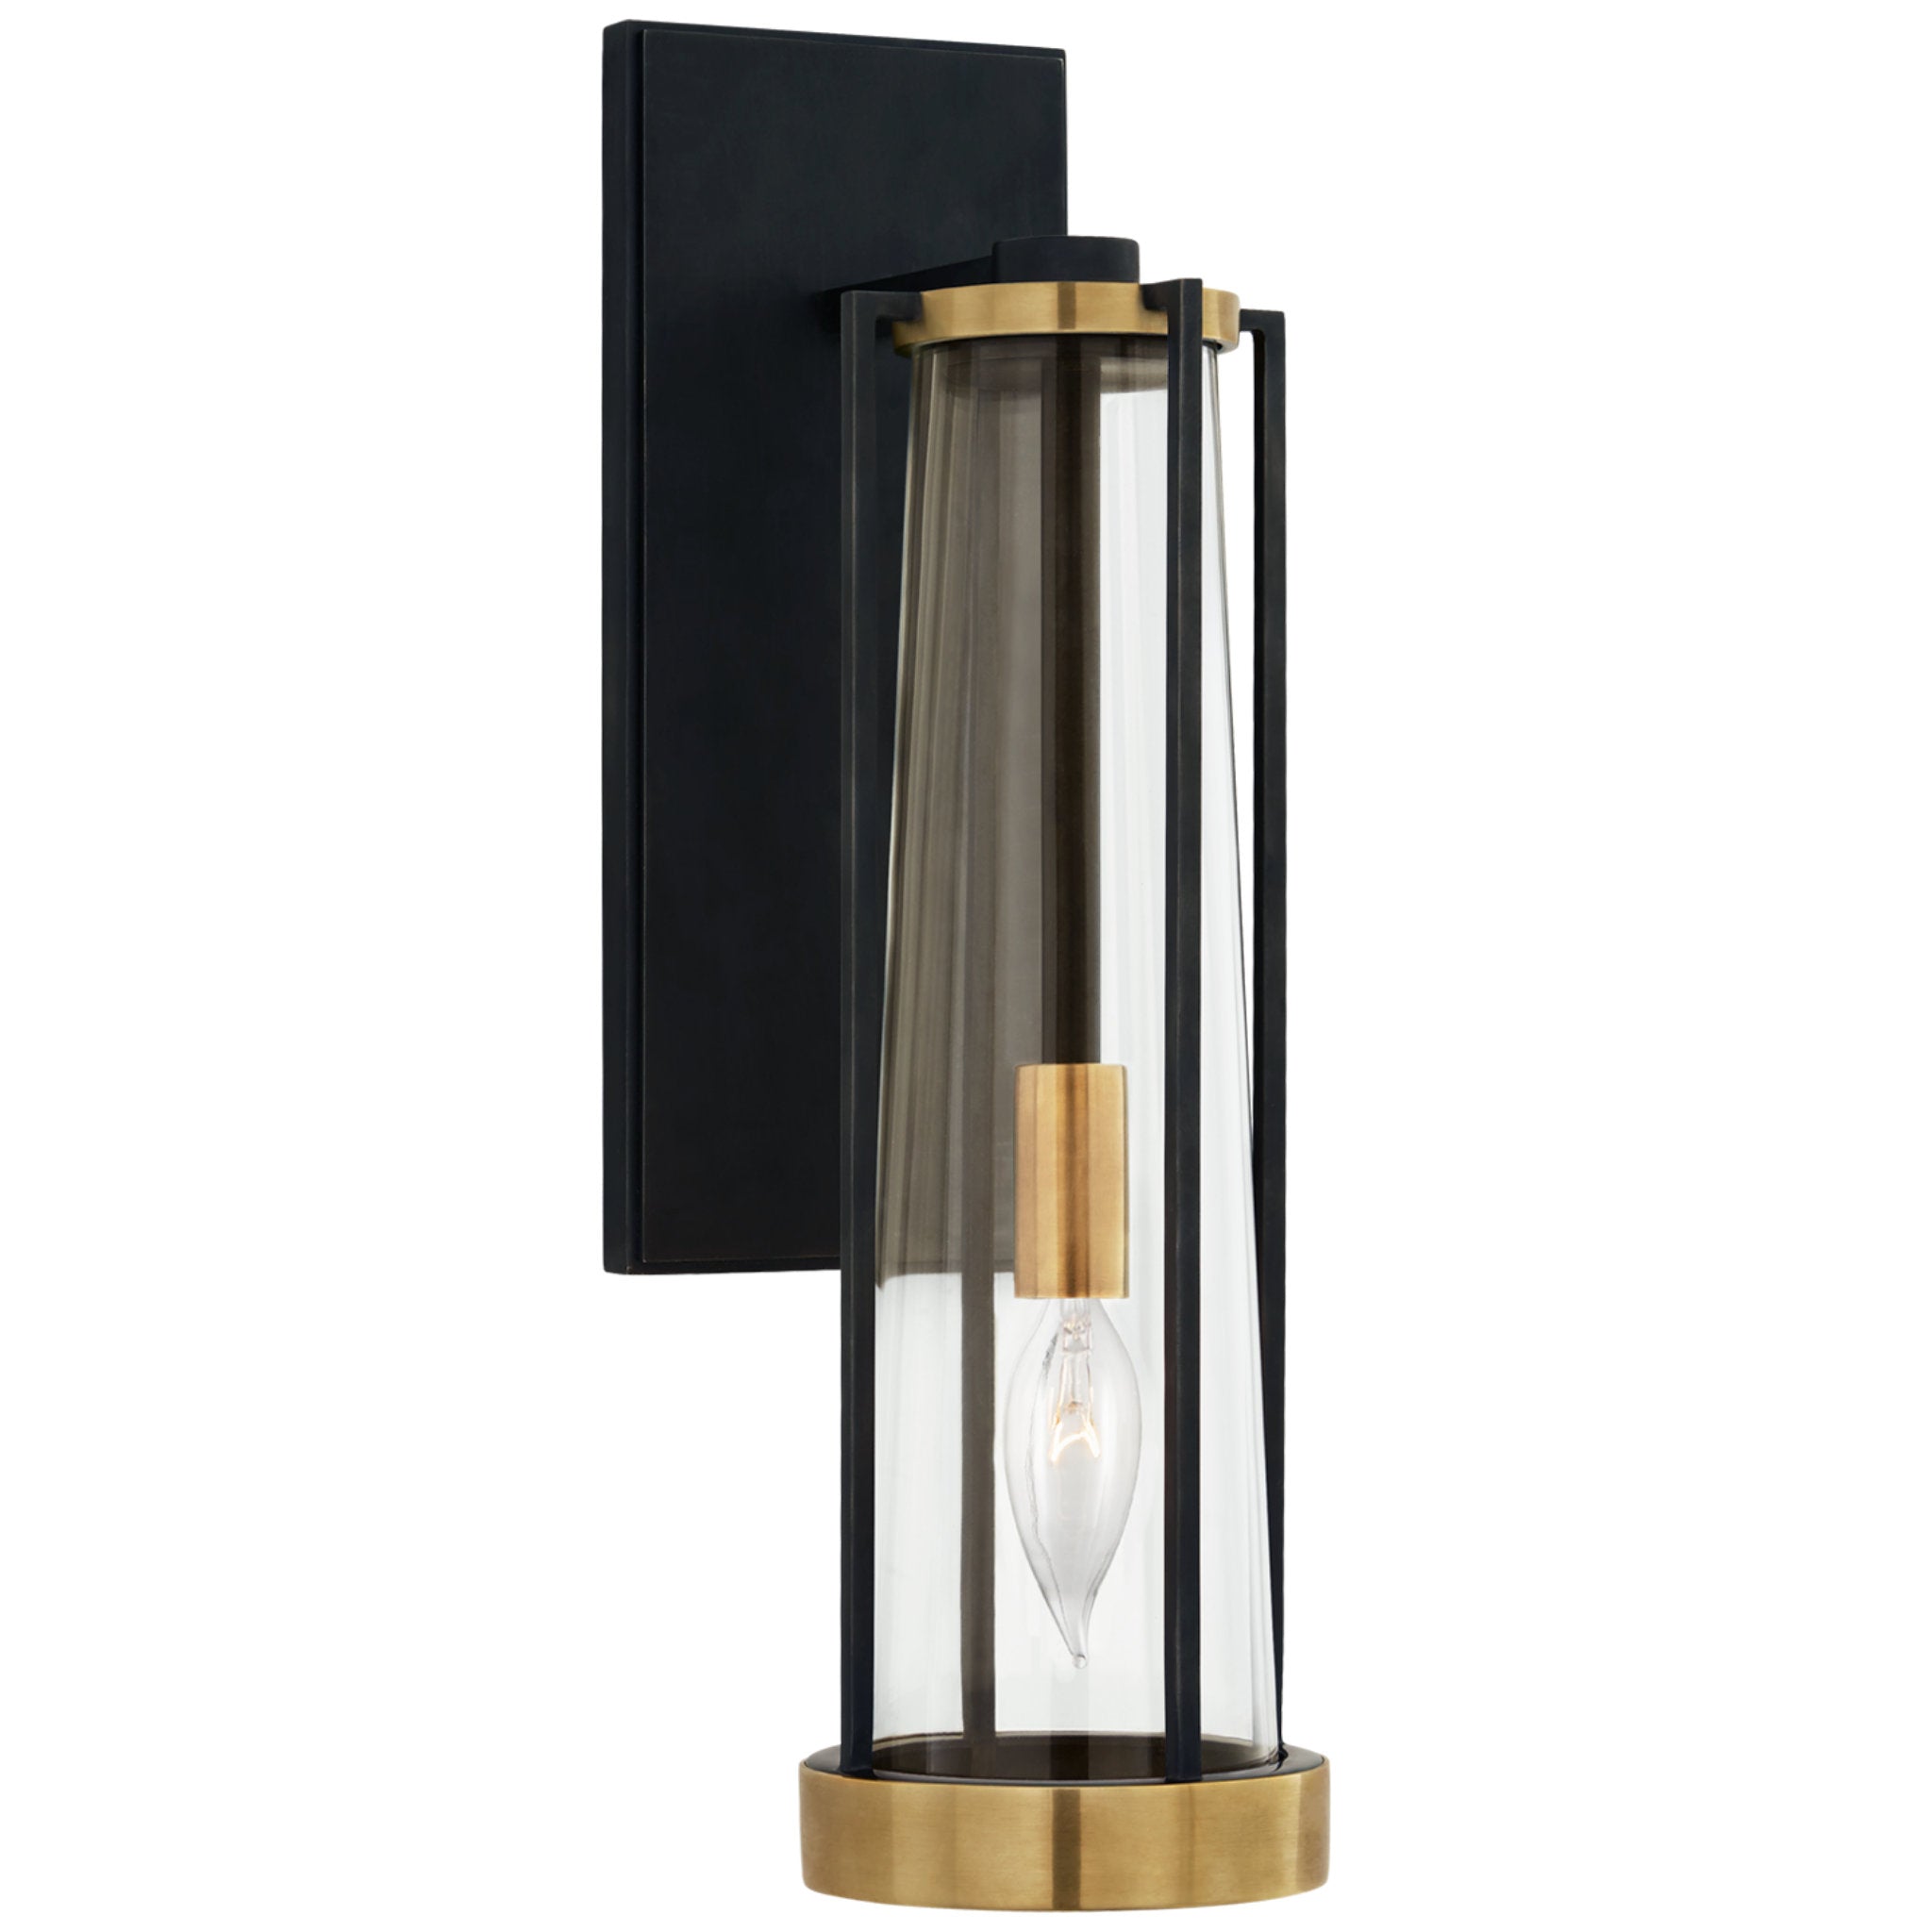 Thomas O'Brien Calix Bracketed Sconce in Bronze and Brass with Clear Glass